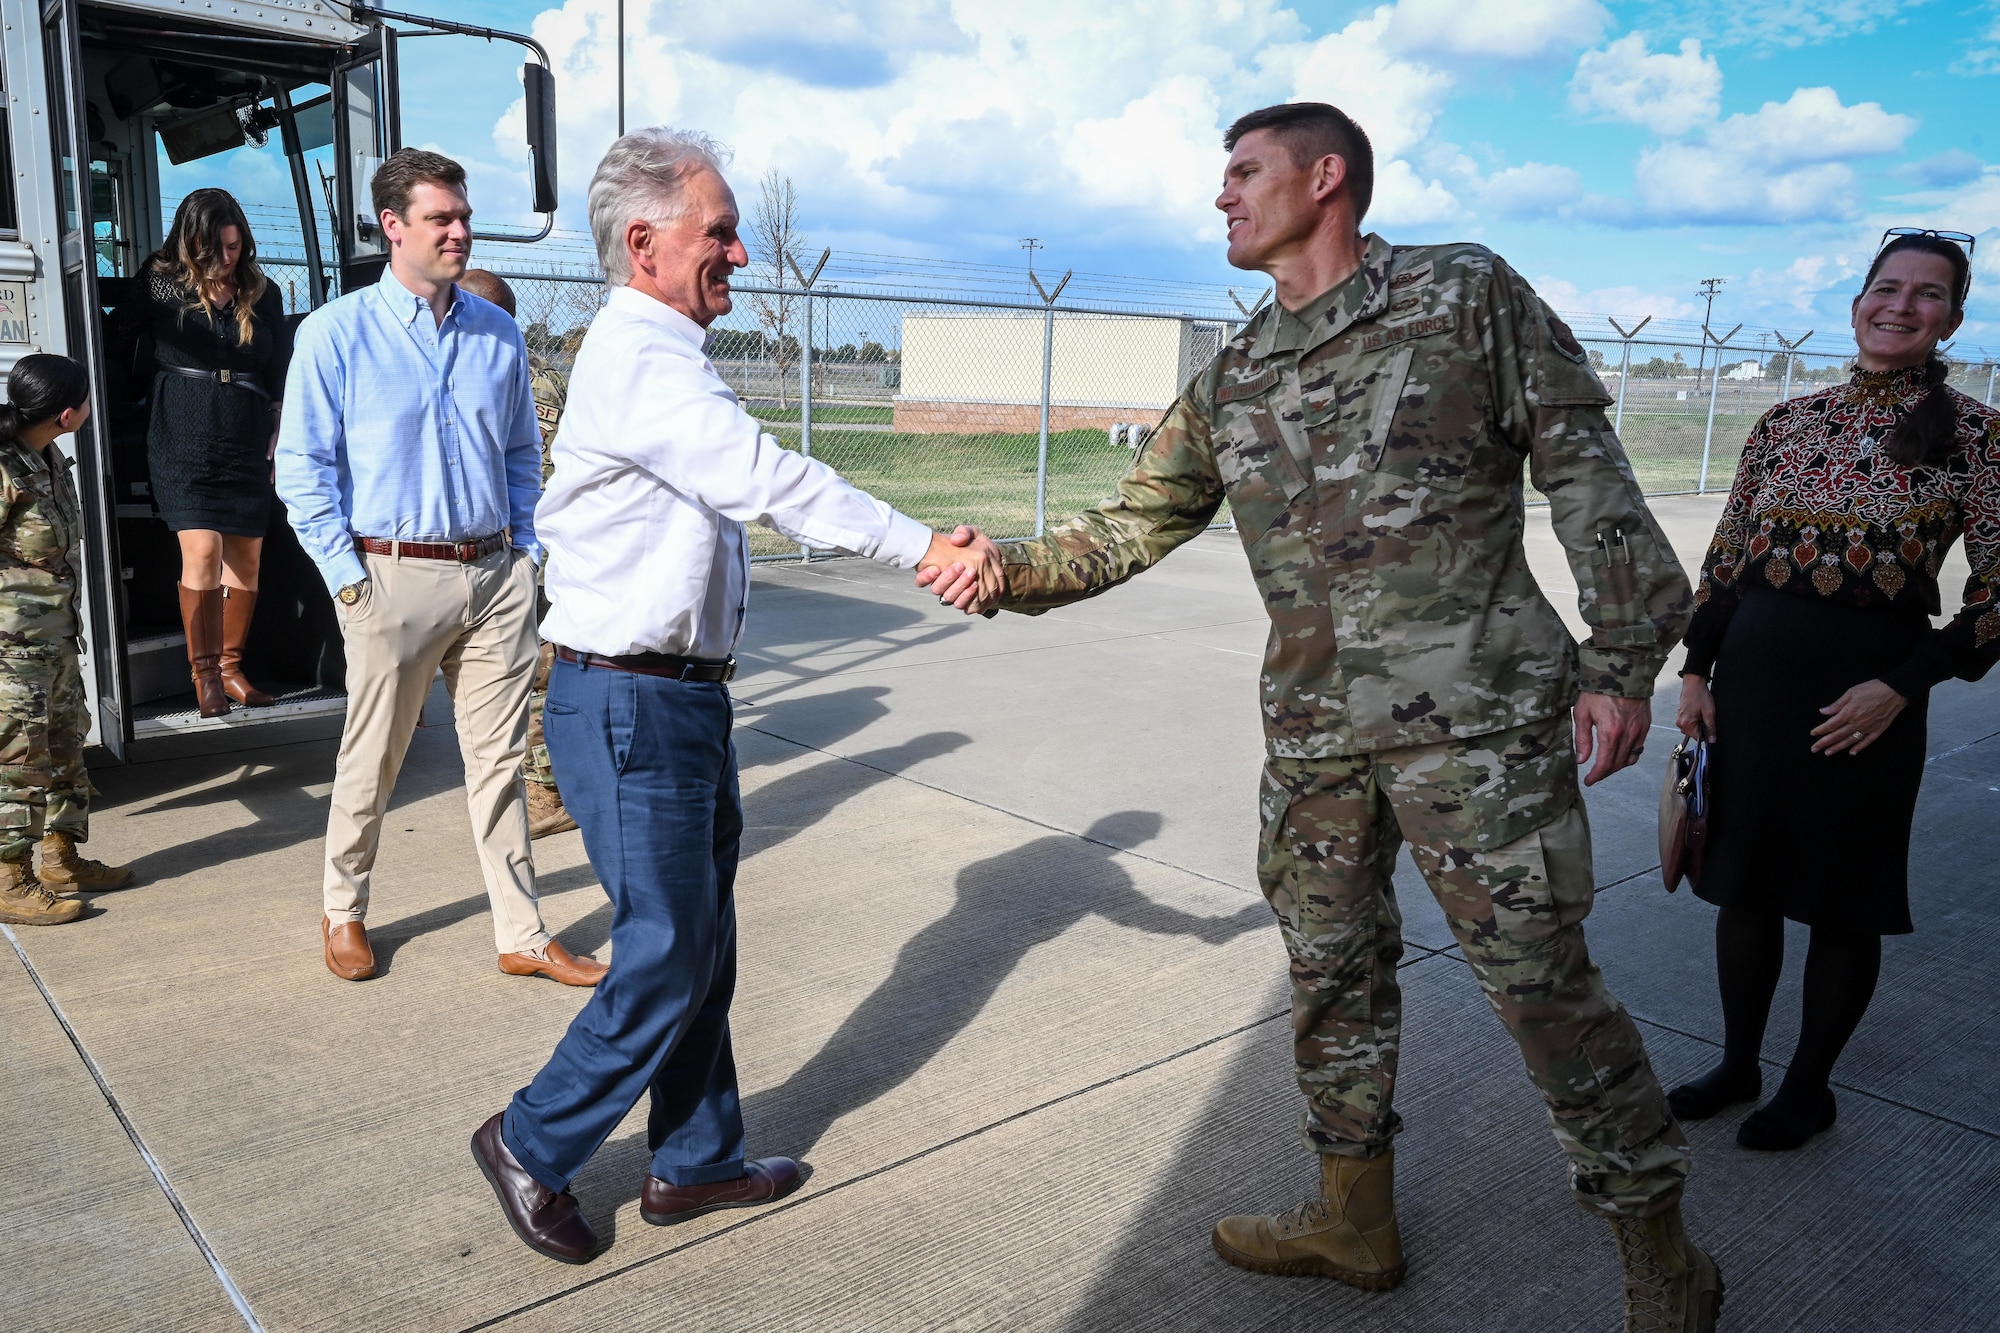 U.S. Air Force Col. Scott Weyermuller, 2nd Bomb Wing commander, greets Mr. Chip Layton, Congressman Mike Johnson’s deputy chief of staff for his Bossier, La. Office, at Barksdale Air Force Base, Louisiana, Nov. 7, 2022.